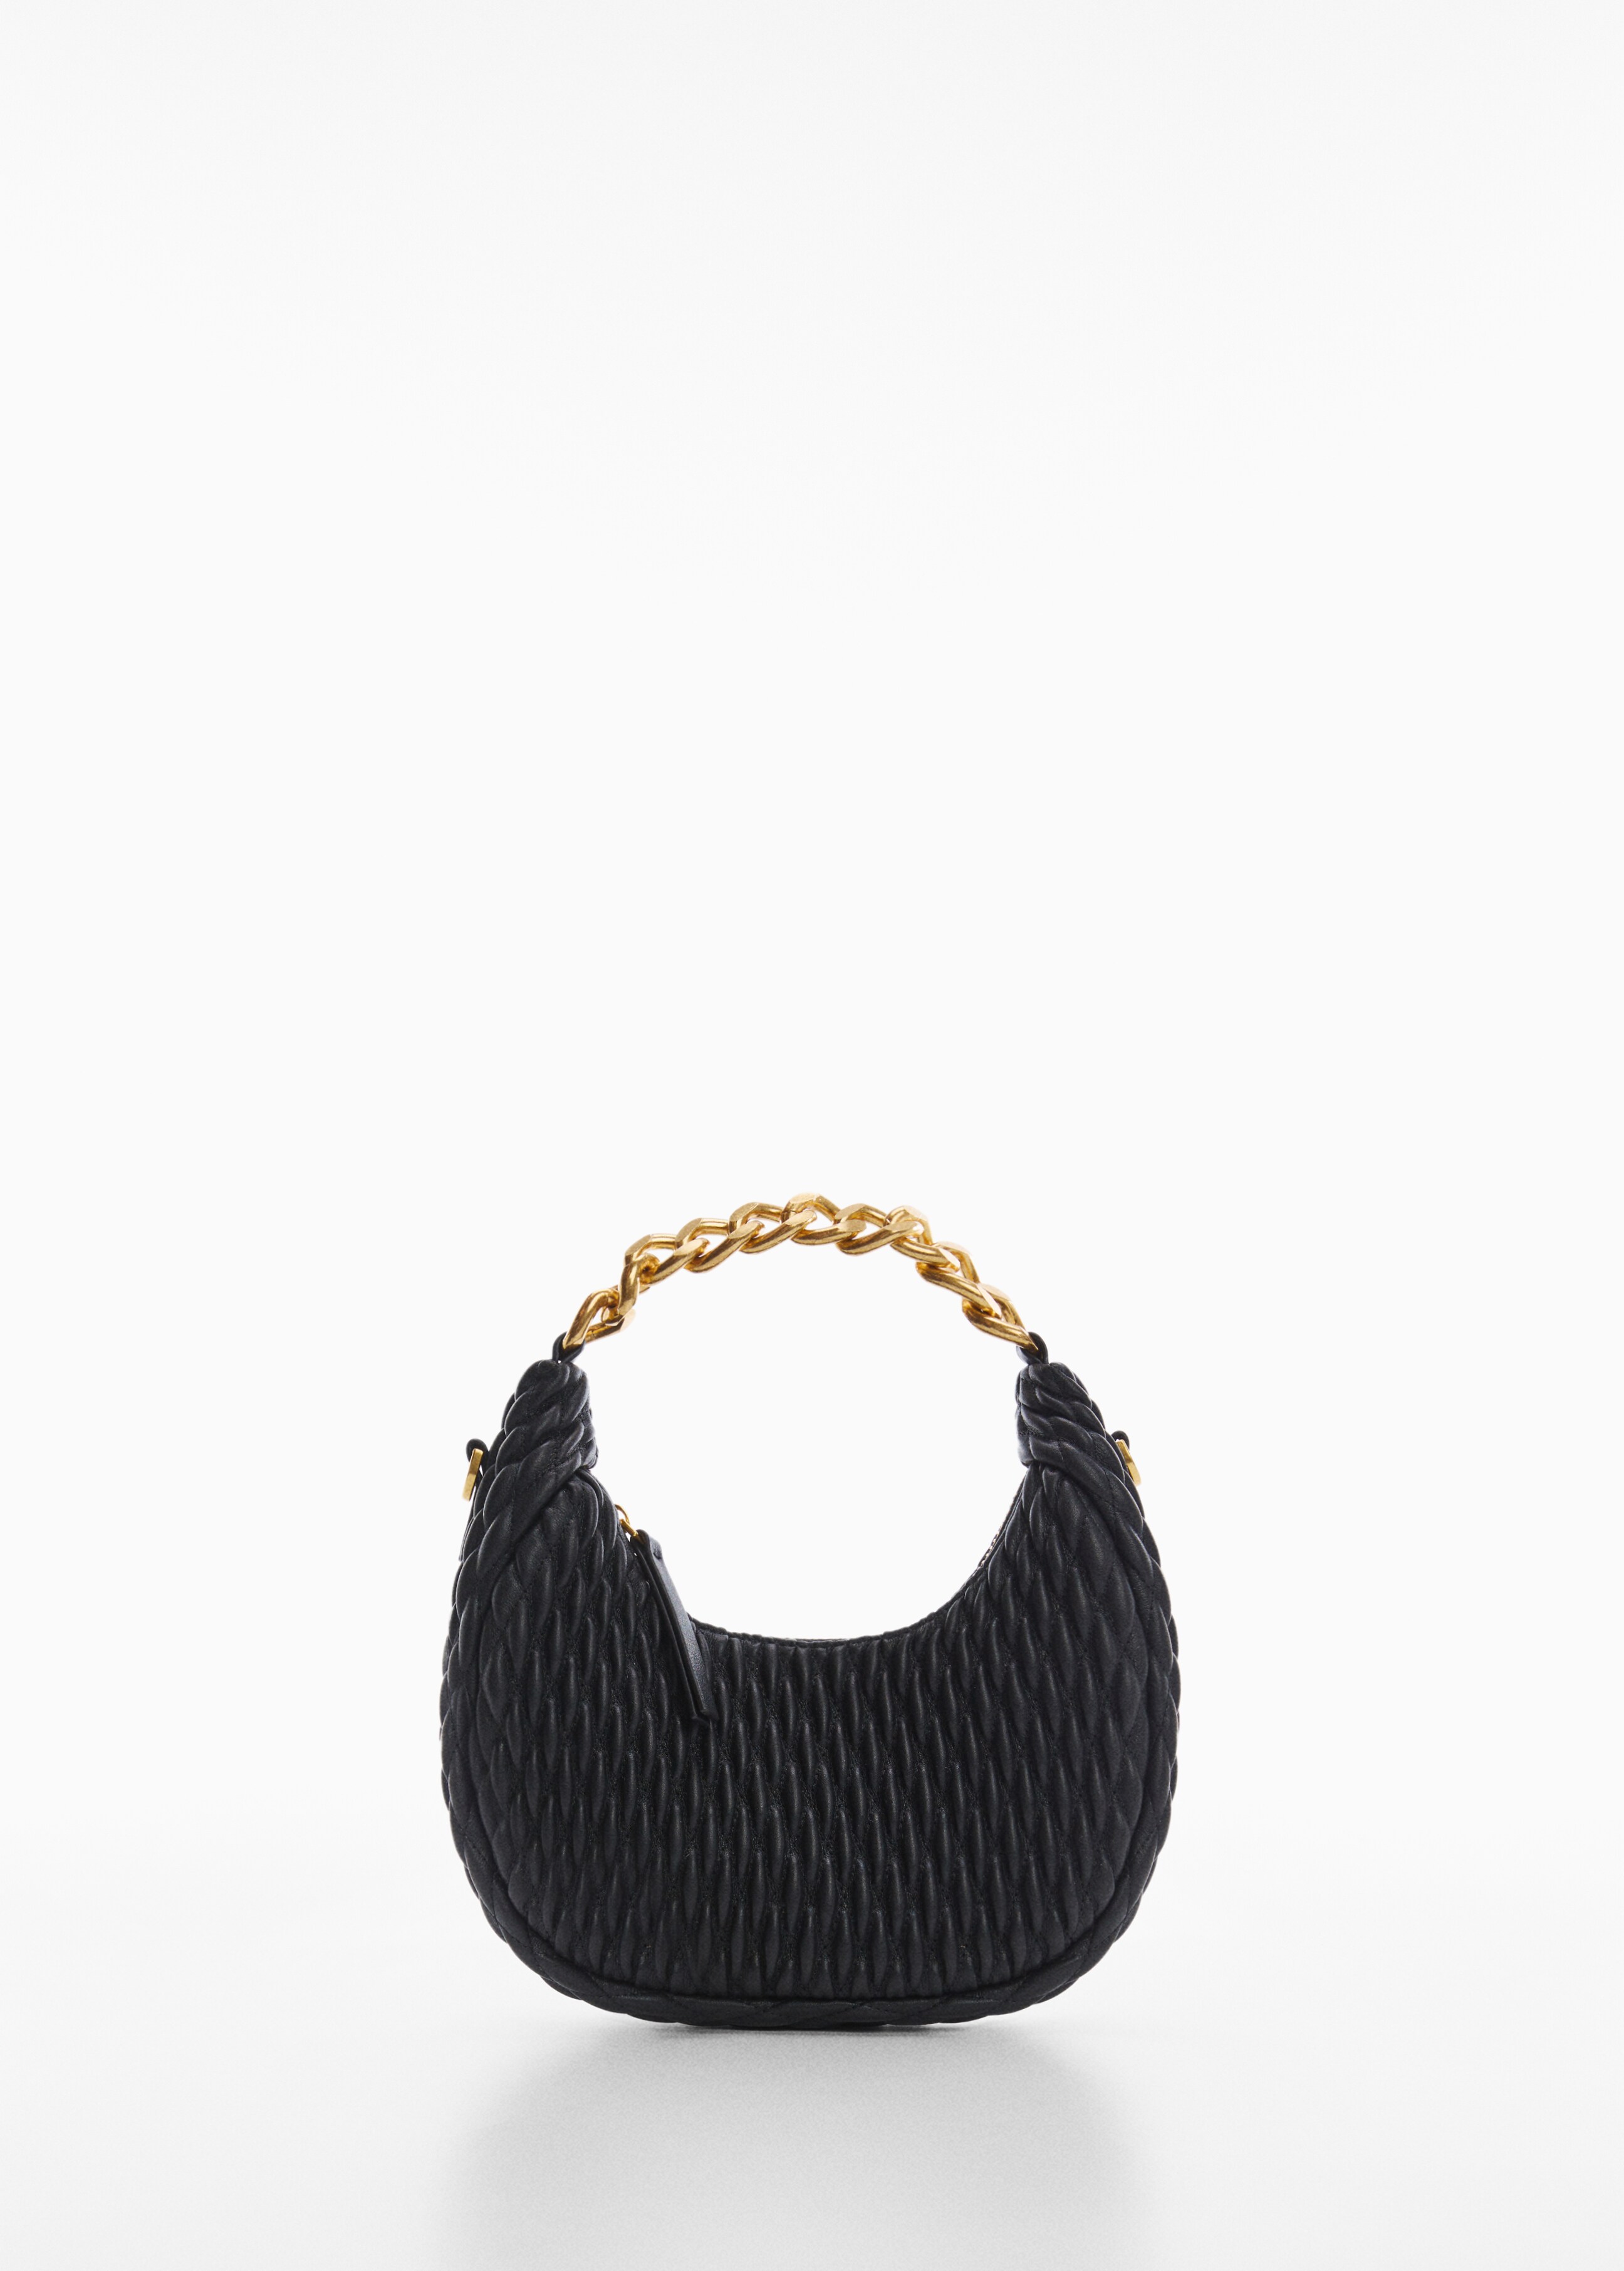 Textured chain bag - Article without model